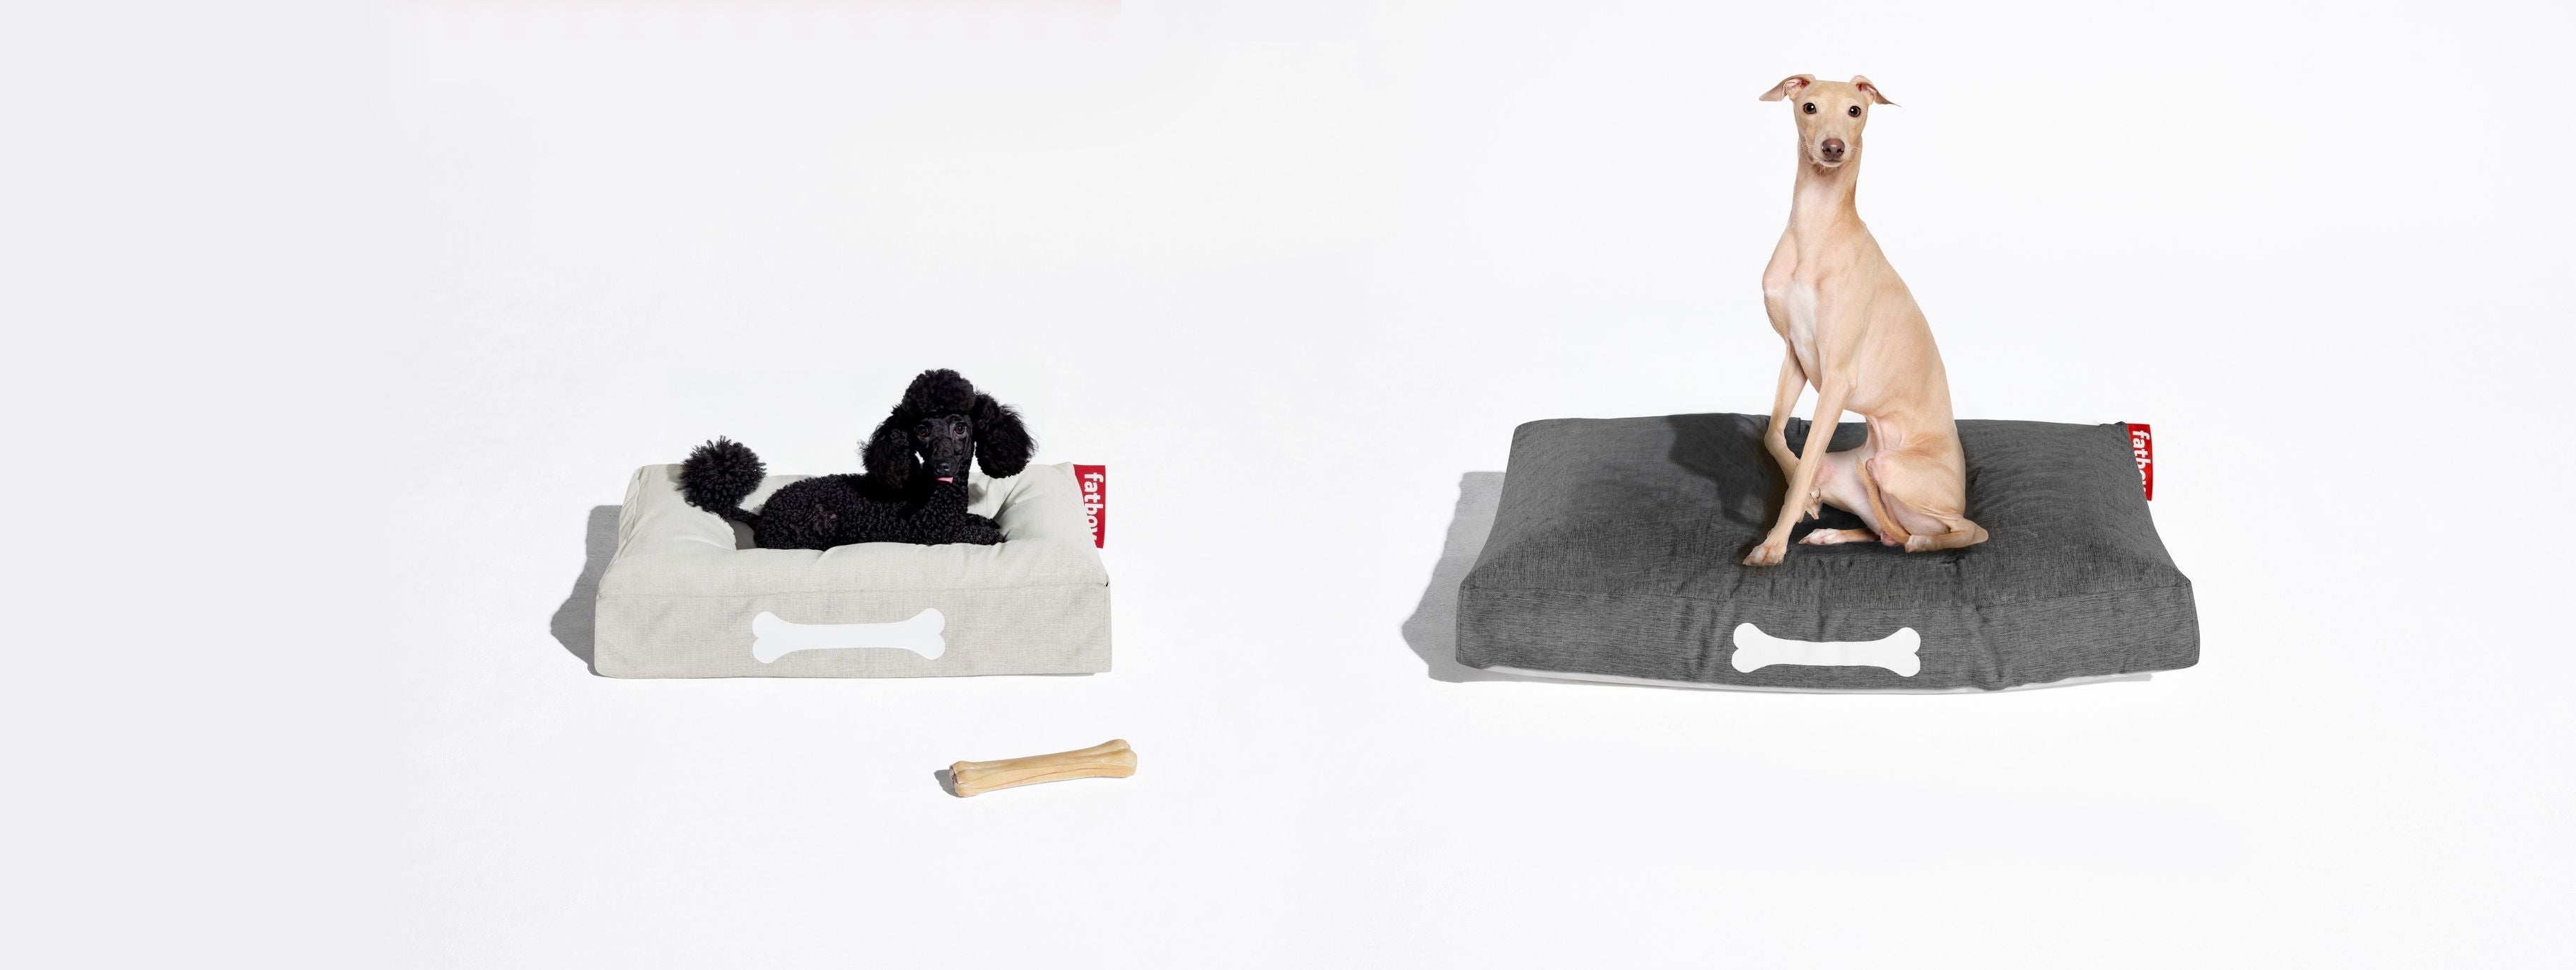 Fatboy Doggielounge olefin dogbed groot, rotsgrijs